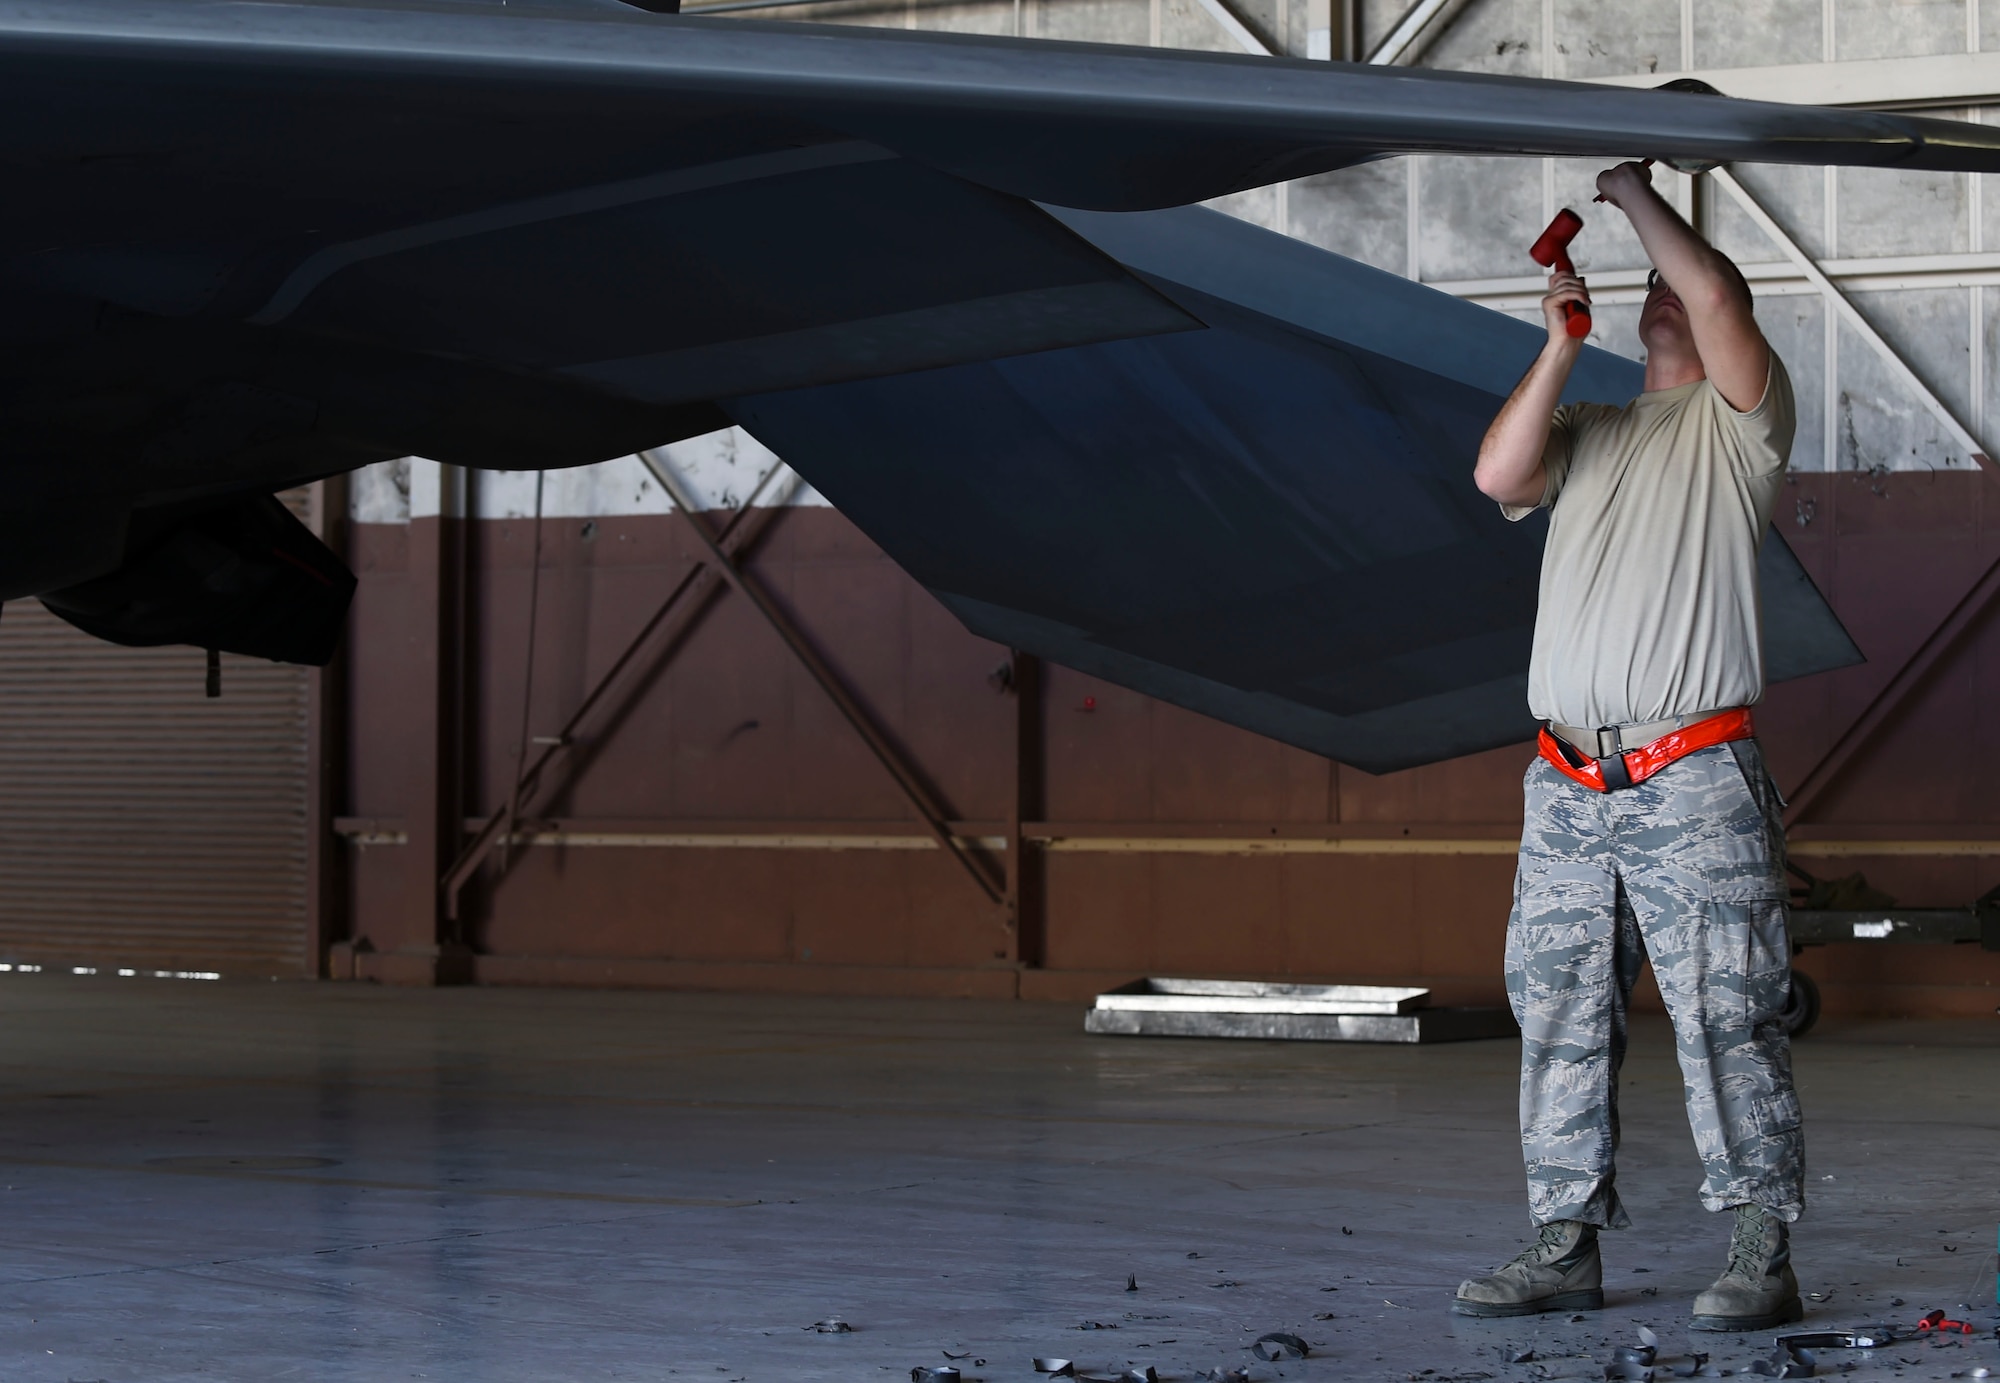 U.S. Air Force Staff Sgt. Zachary Dunn, 192nd Fighter Wing low observable aircraft structures technician, hammers radar absorbent material from an F-22 Raptor during Red Flag 17-1 at Nellis Air Force Base, Nev., Feb. 3, 2017. The material was covering a light panel that will later be fixed by  27th Aircraft Maintenance Unit maintainers. (U.S. Air Force photo by Staff Sgt. Natasha Stannard)